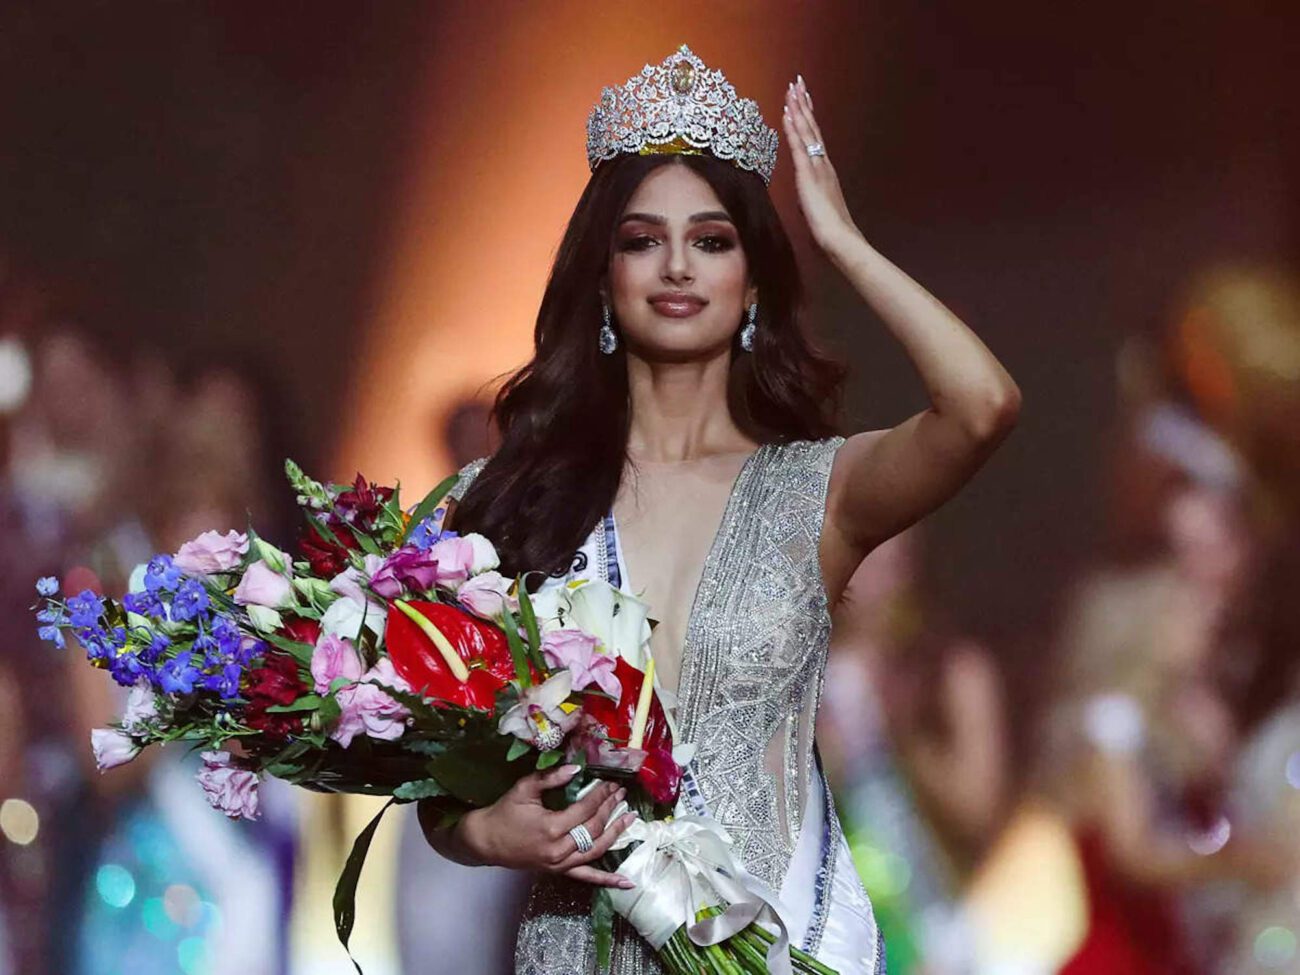 For the first time in 21 years, Miss India will be bringing home the title of Miss Universe 2021. Meet Harnaaz Sandhu who won with her intellect and beauty.